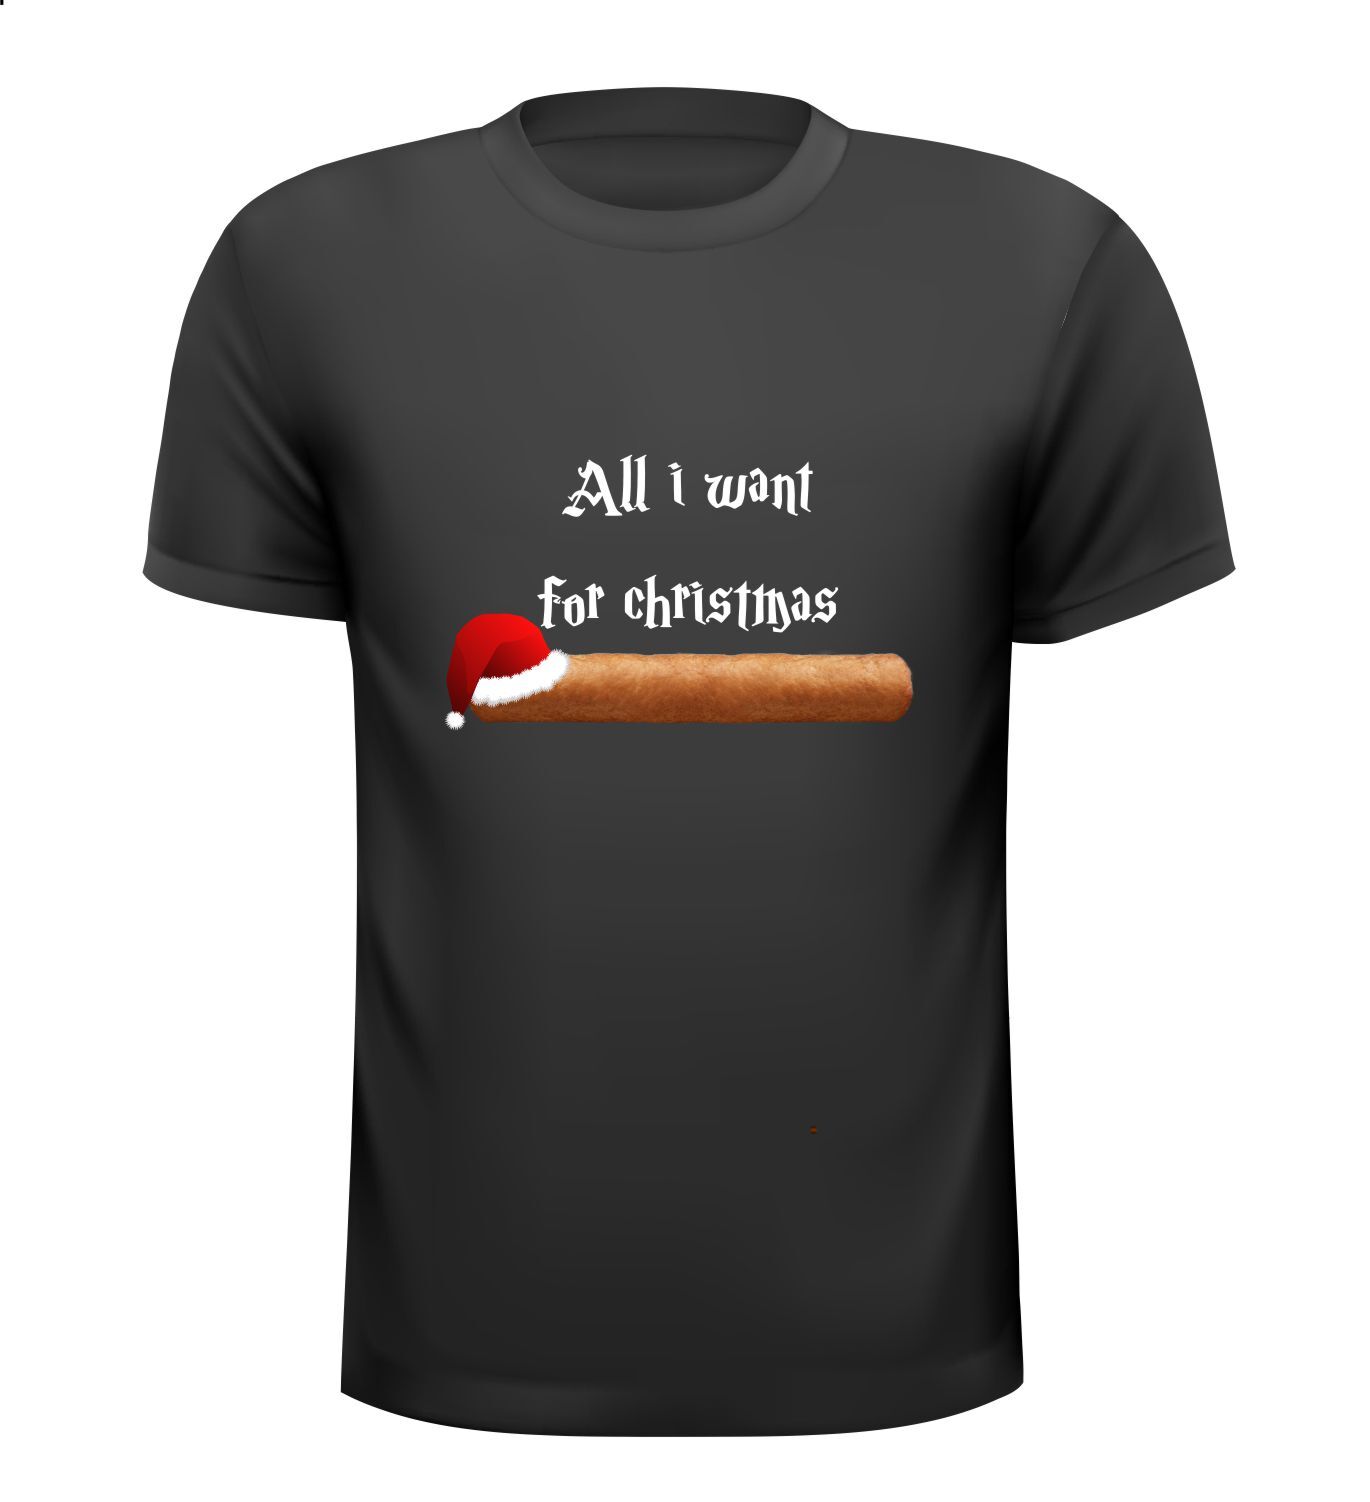 all i want for christmas is frikandel fast food grappig kerst T-shirt